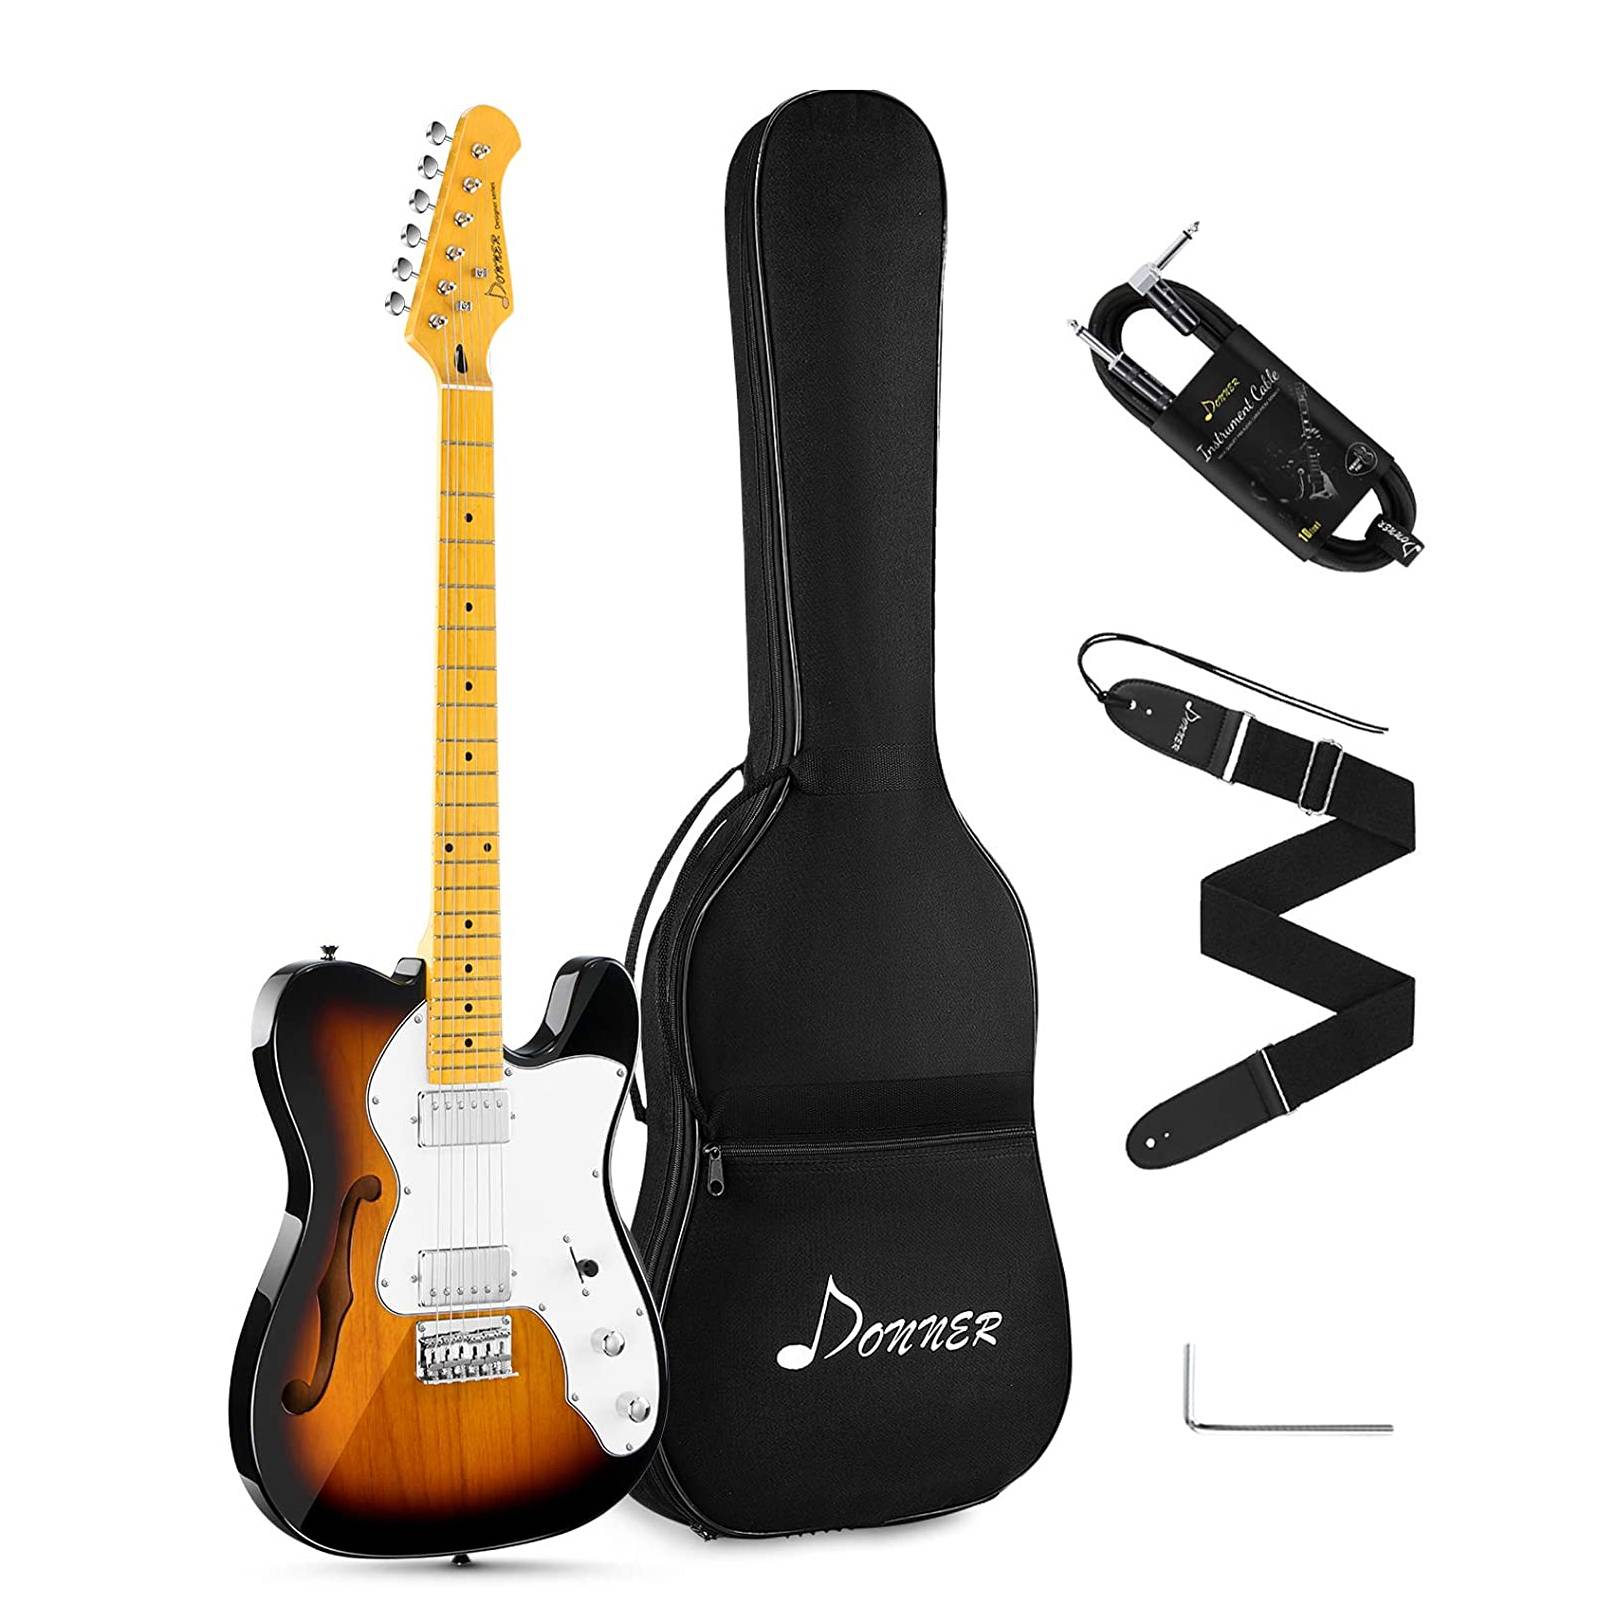 

Donner 39 Inch Jazz Electric Guitar TL Style F Hole Sunburst Beginner Full Size H-H Pickups with Bag, Strap, Cable,DJC-1000S